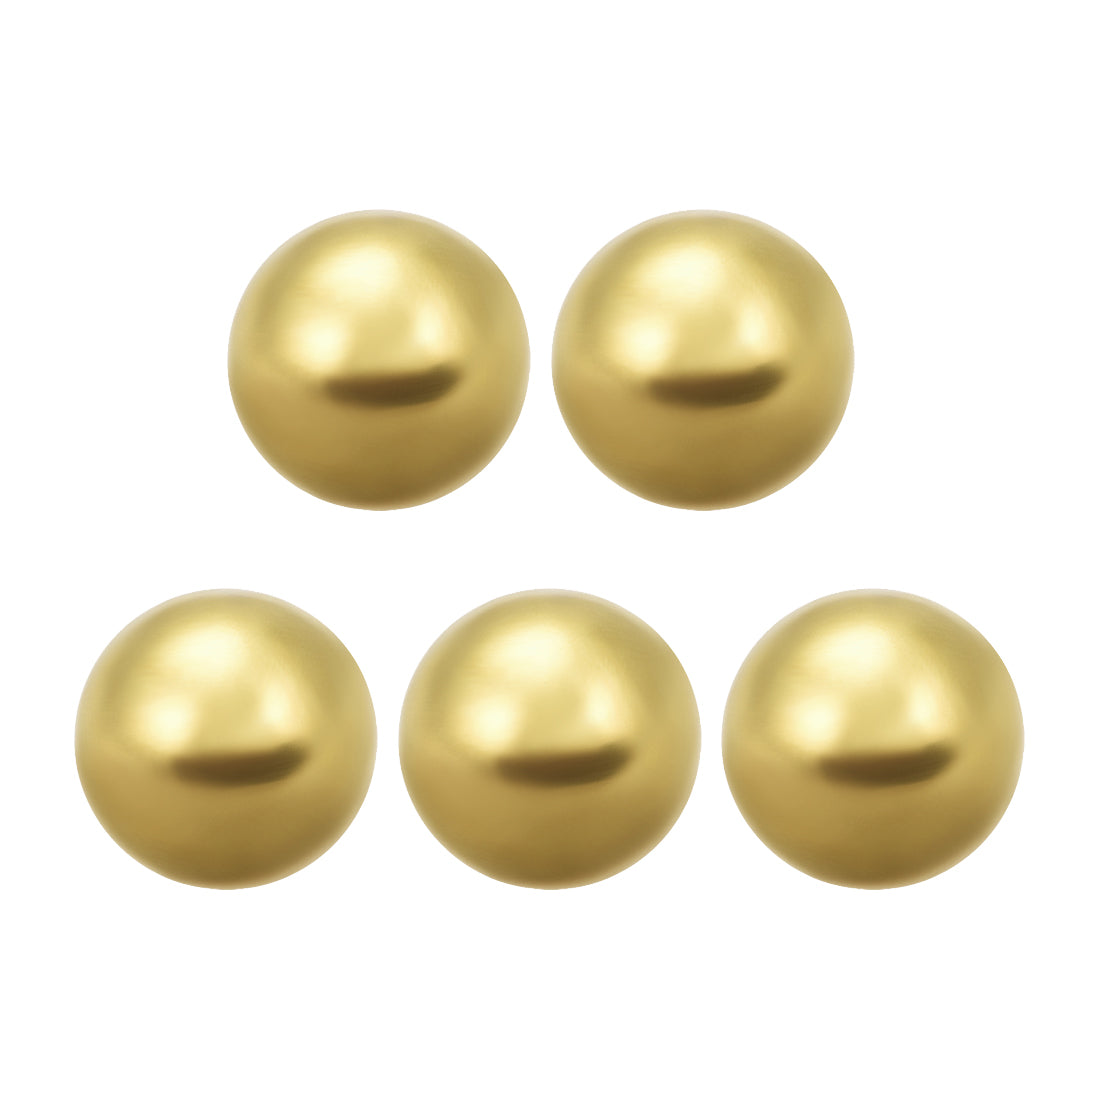 uxcell Uxcell 1/2-inch Precision Solid Brass Bearing Balls 5pcs